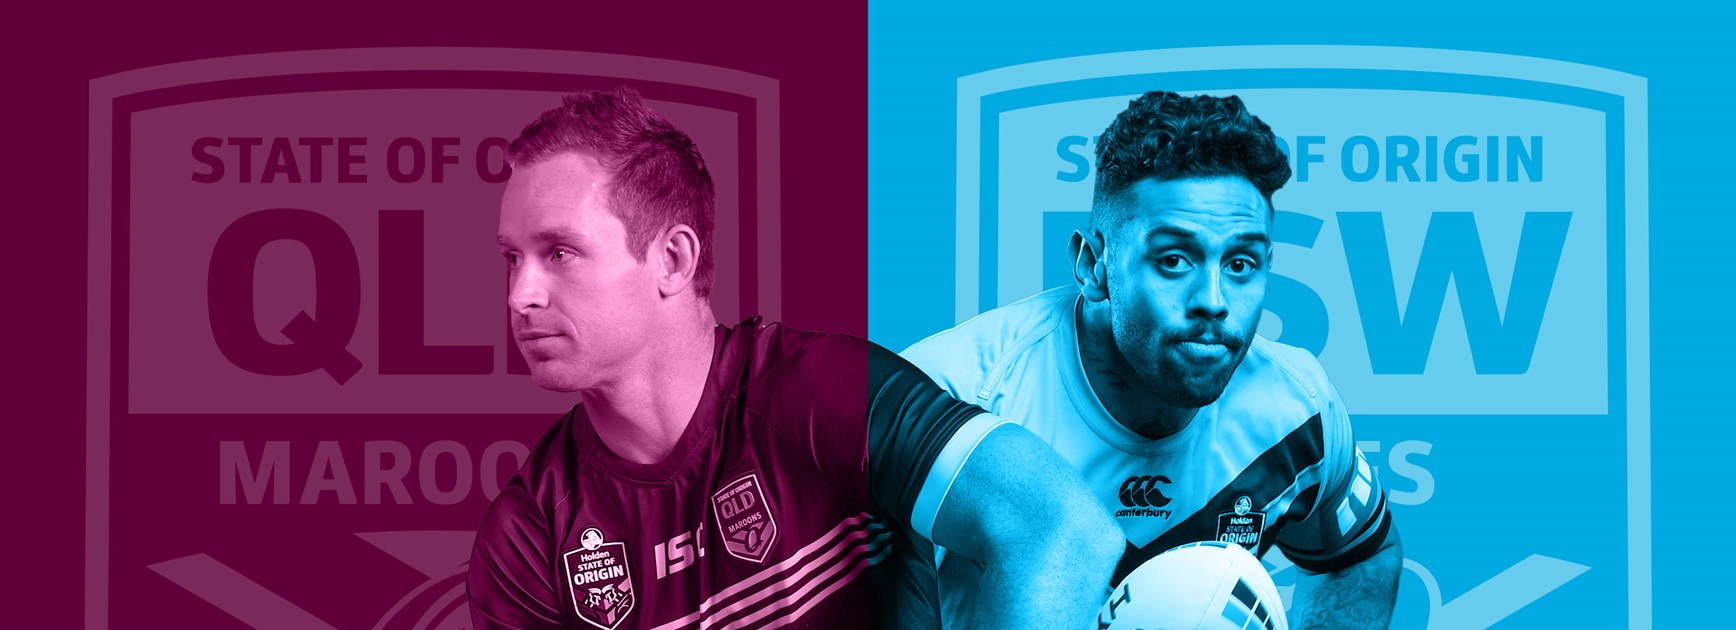 Maroons v Blues: Game one Origin preview